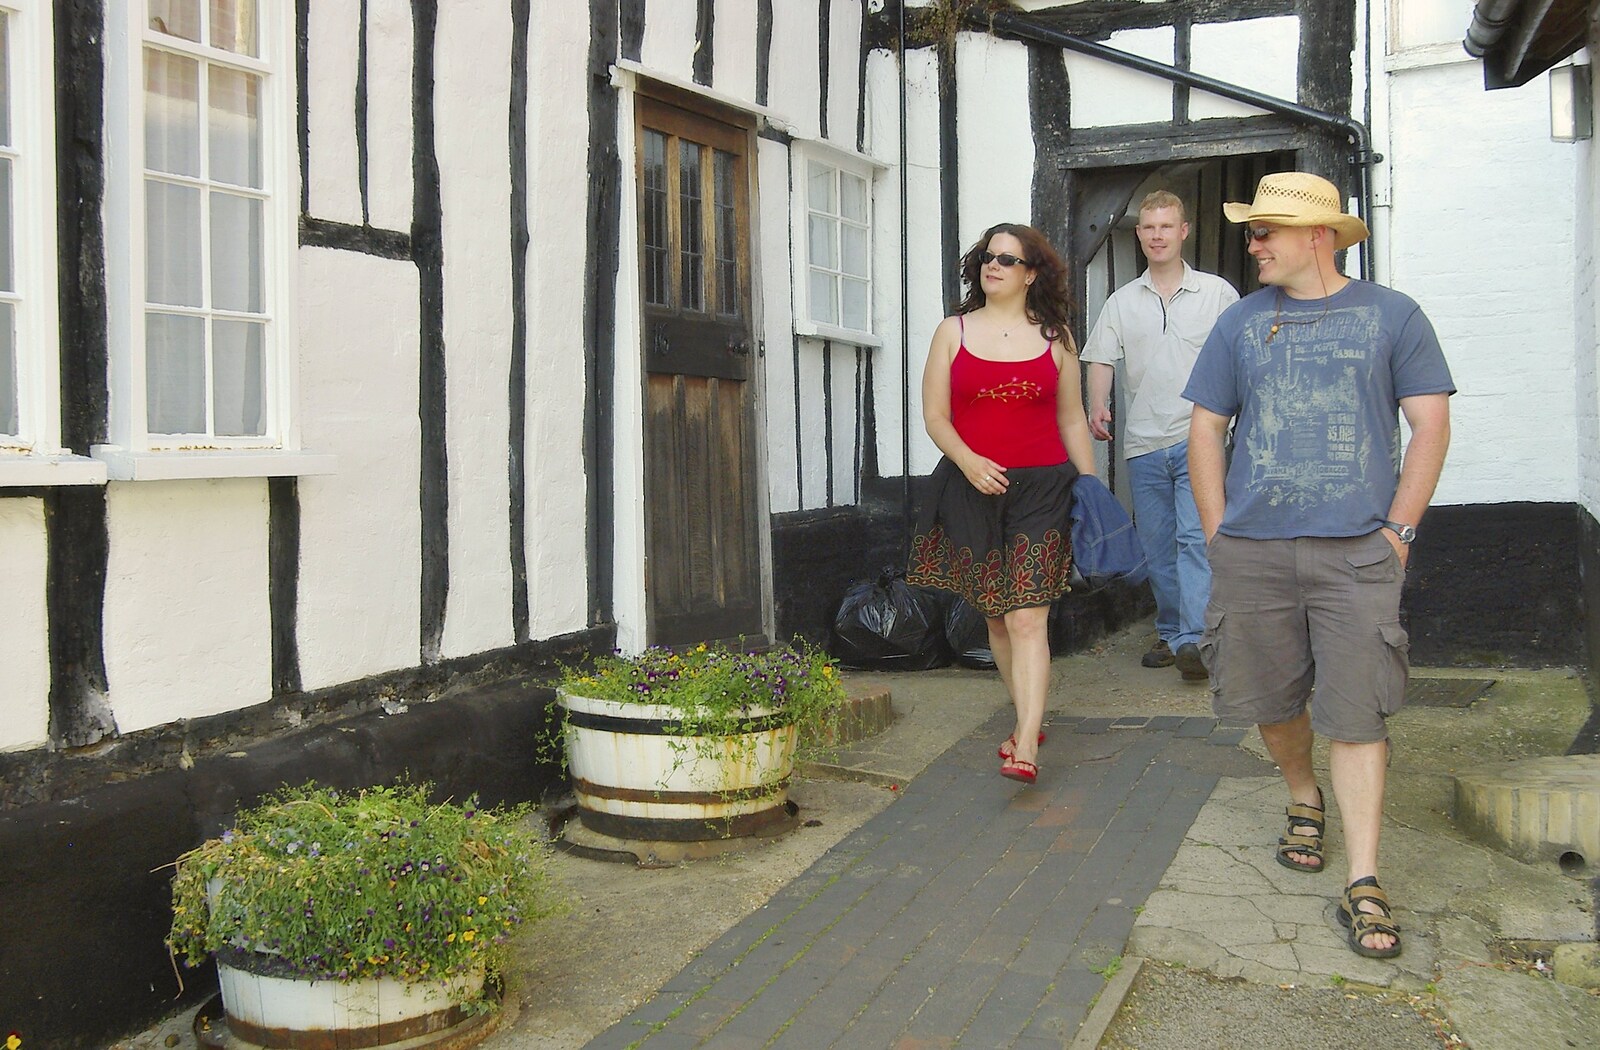 Roaming around timber-framed buildings from A Picnic by the Castle on a Hill, Framlingham, Suffolk - 17th June 2006